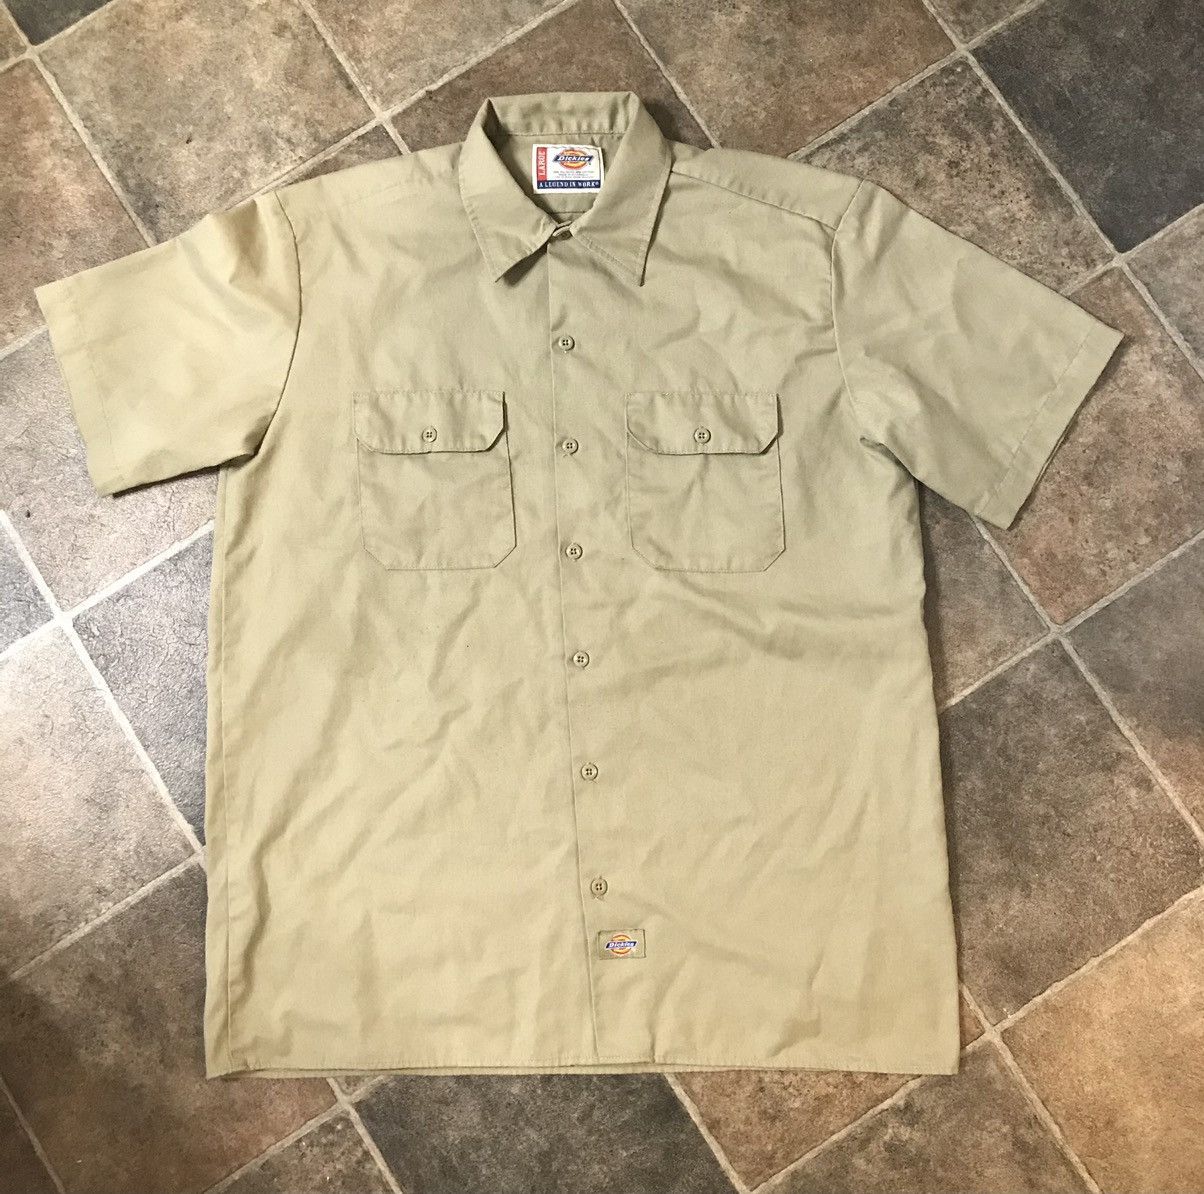 Vintage Vintage 2000’s Dickies button-up shirt | Grailed